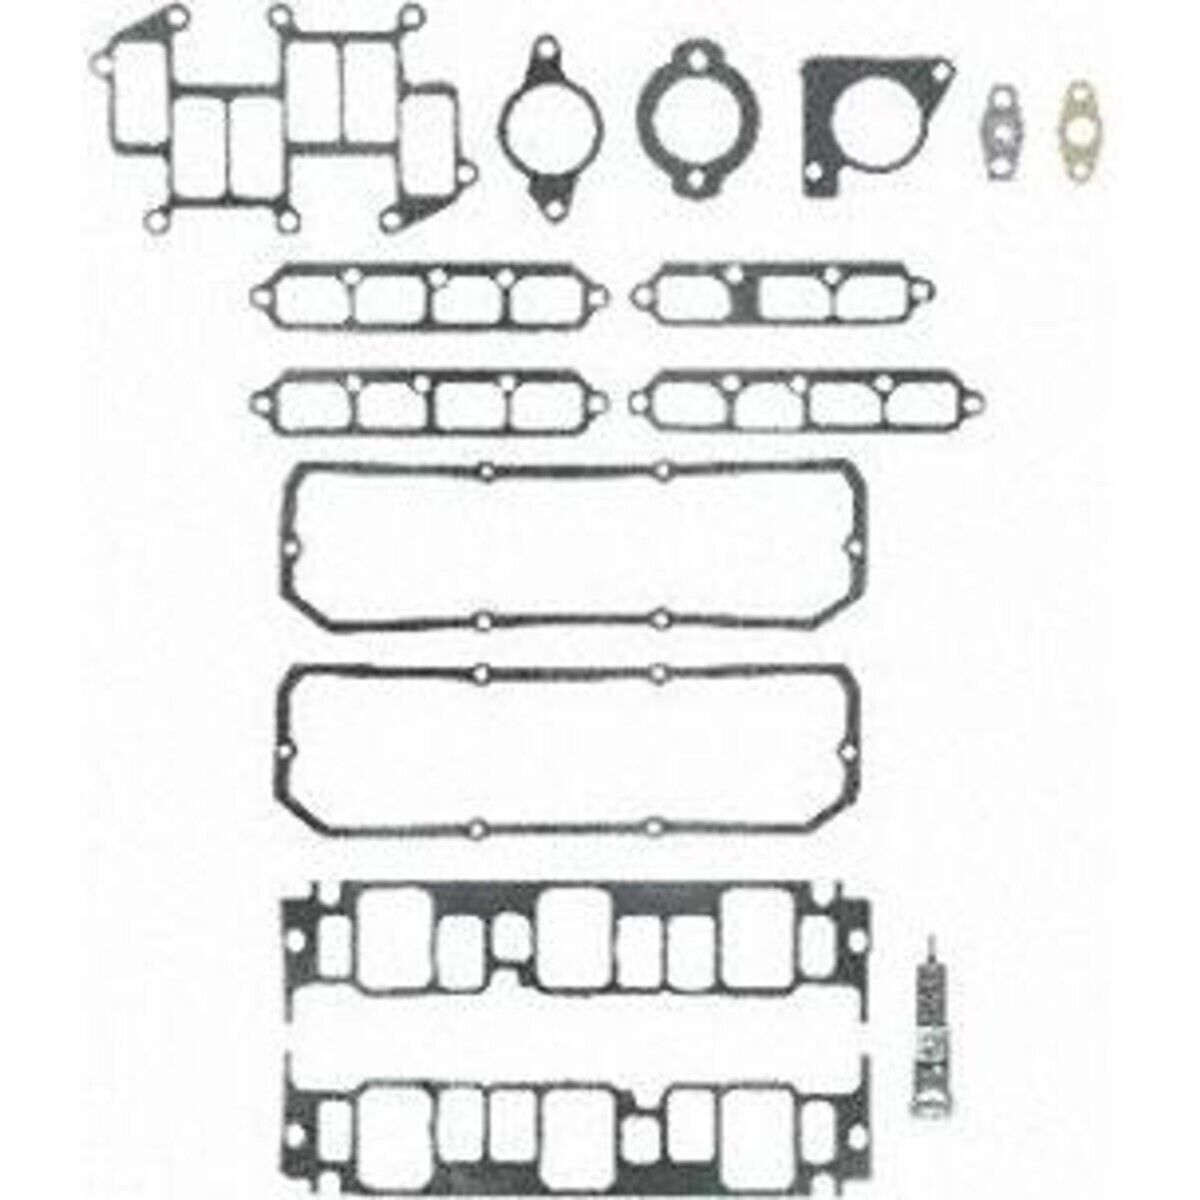 MS 93020 Felpro Set Intake Manifold Gaskets for Chevy Olds Citation Cutlass